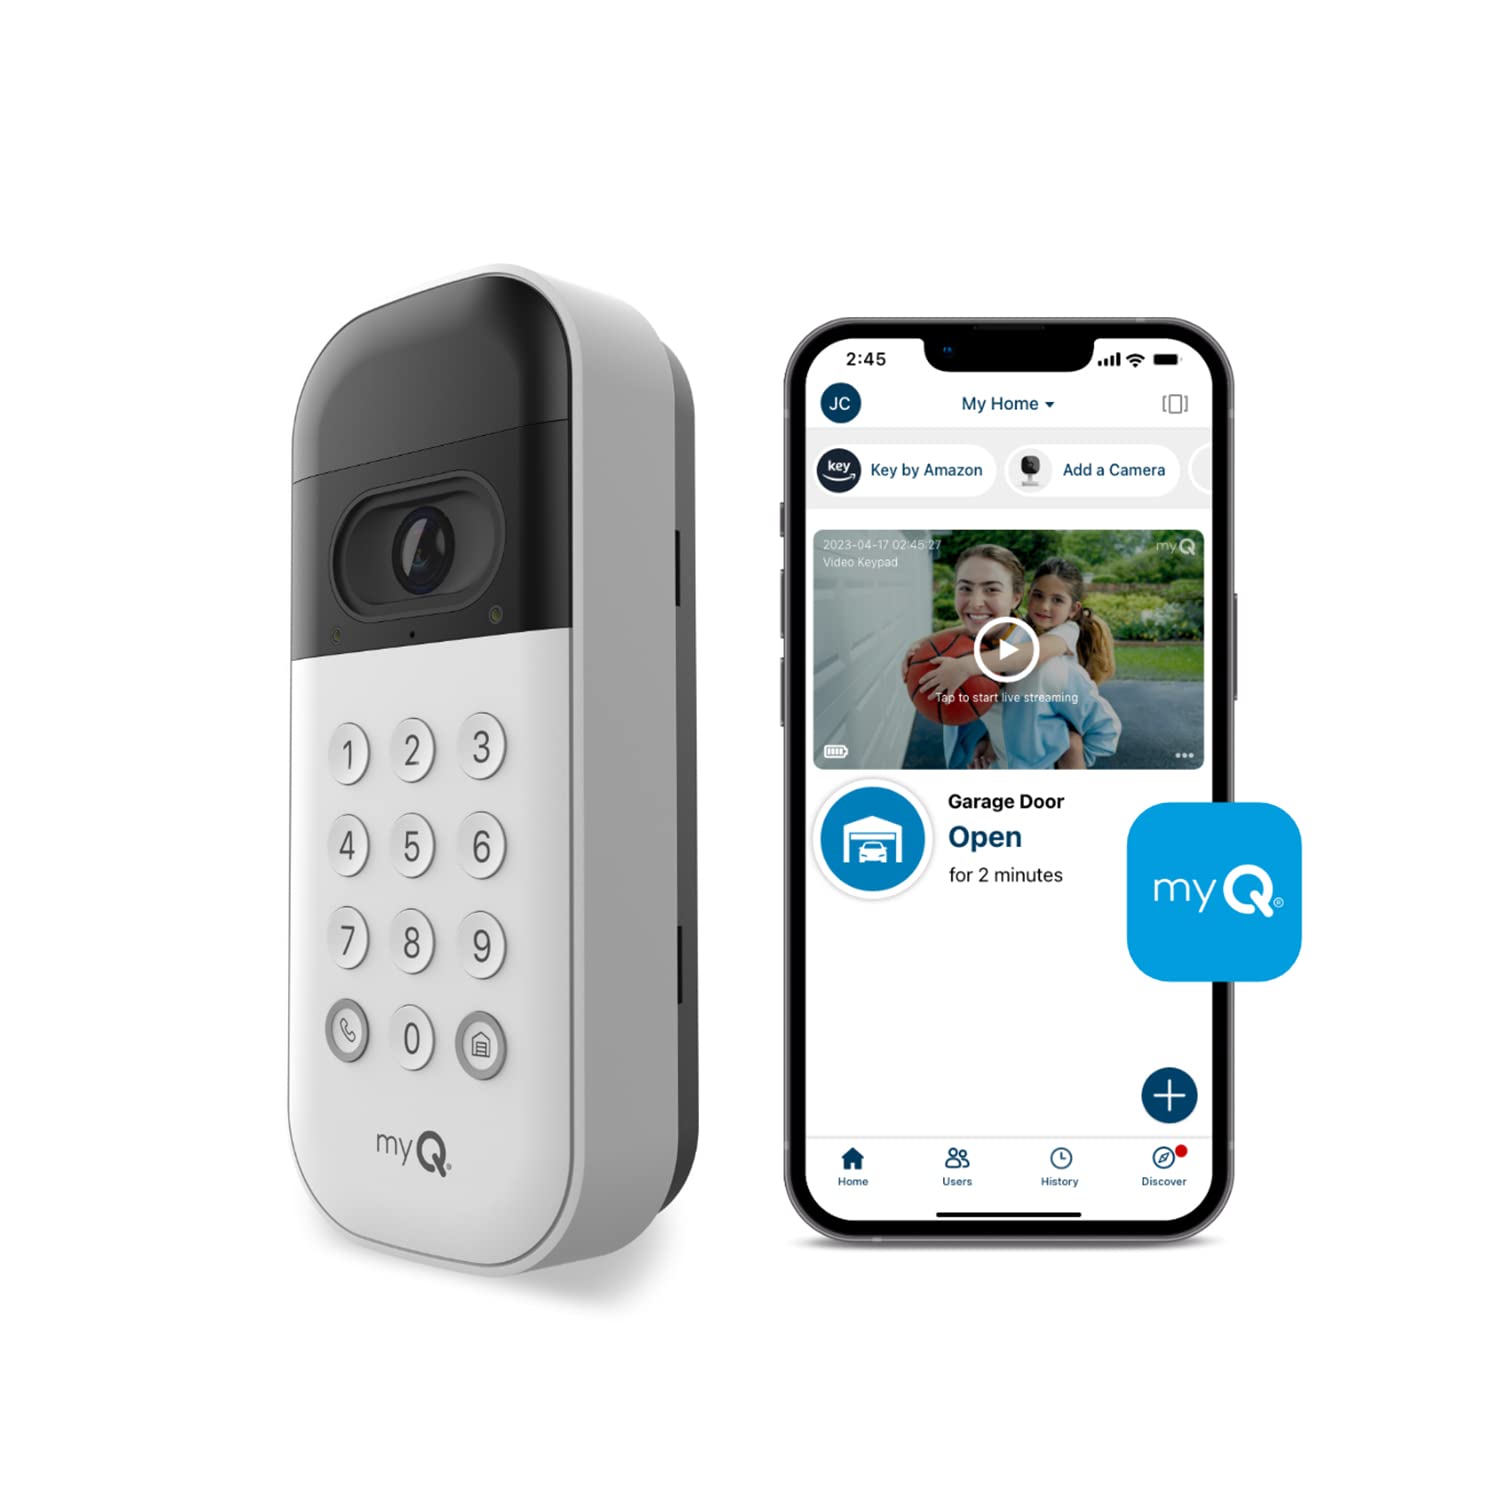 myQ Smart Garage Door Video Keypad with Wide-Angle Camera, Customizable PIN Codes, and Smartphone Control –Works with Chamberlain, LiftMaster and Craftsman openers Only $49.99